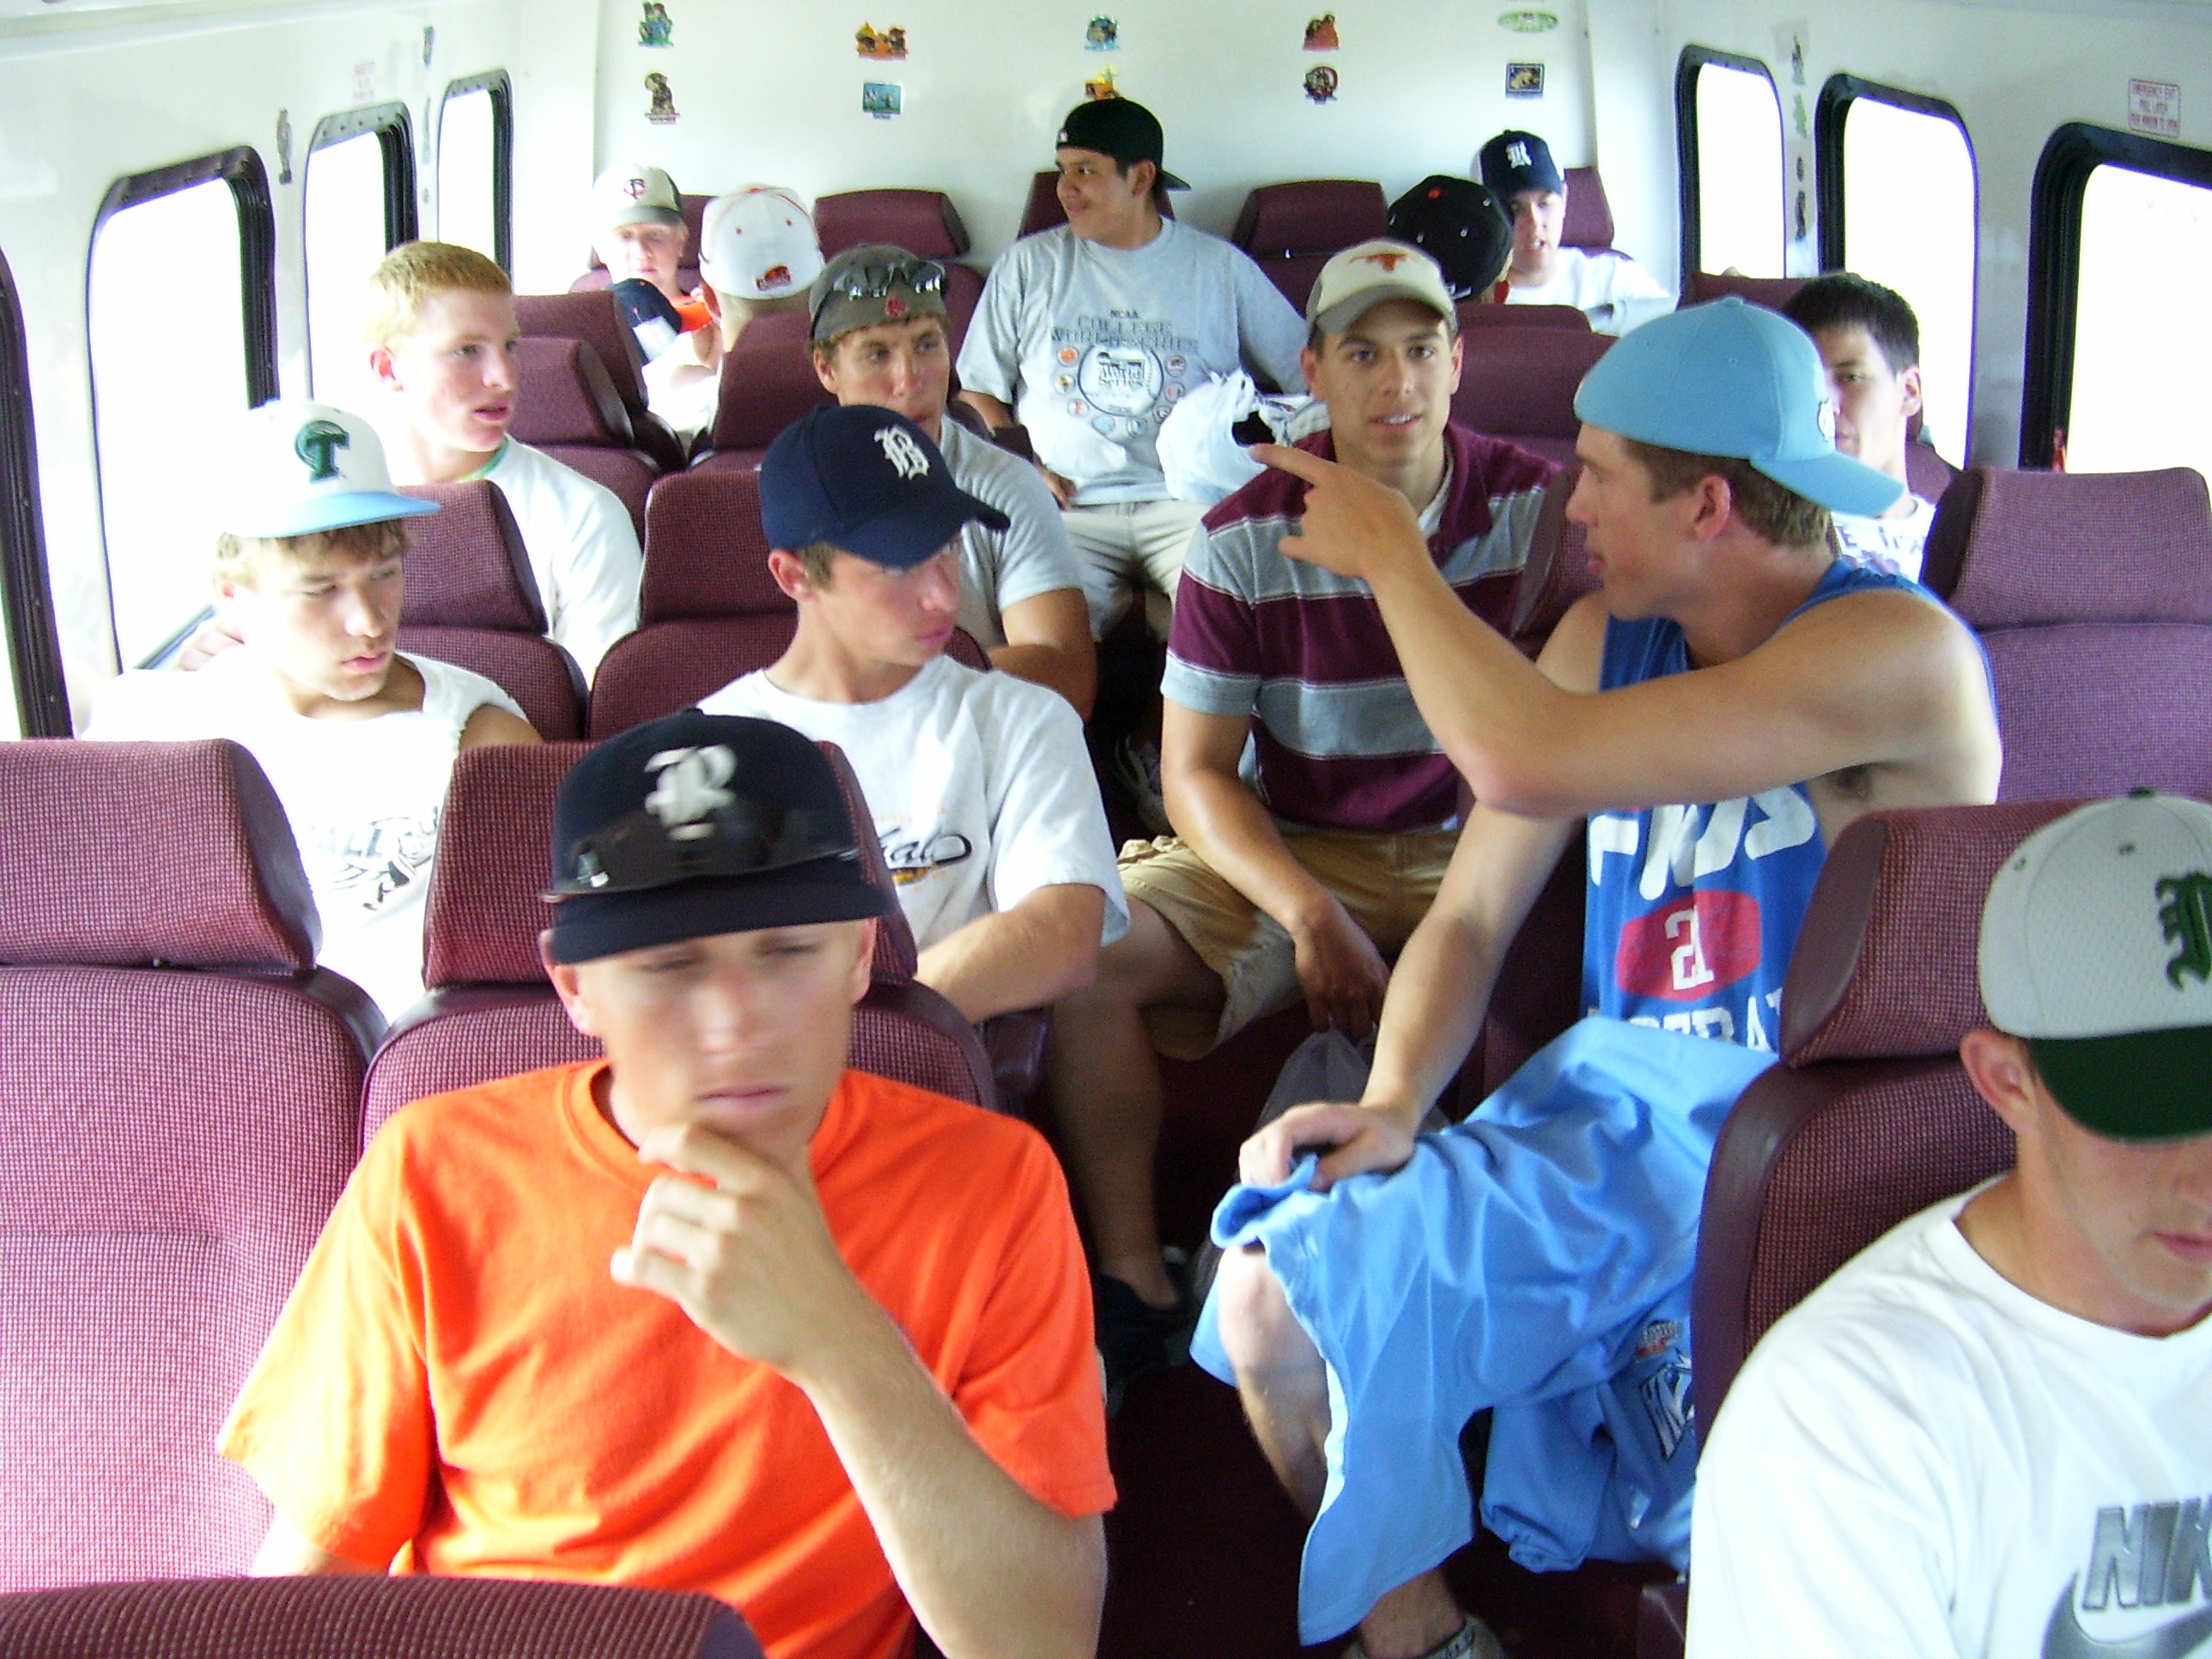 The bus ride